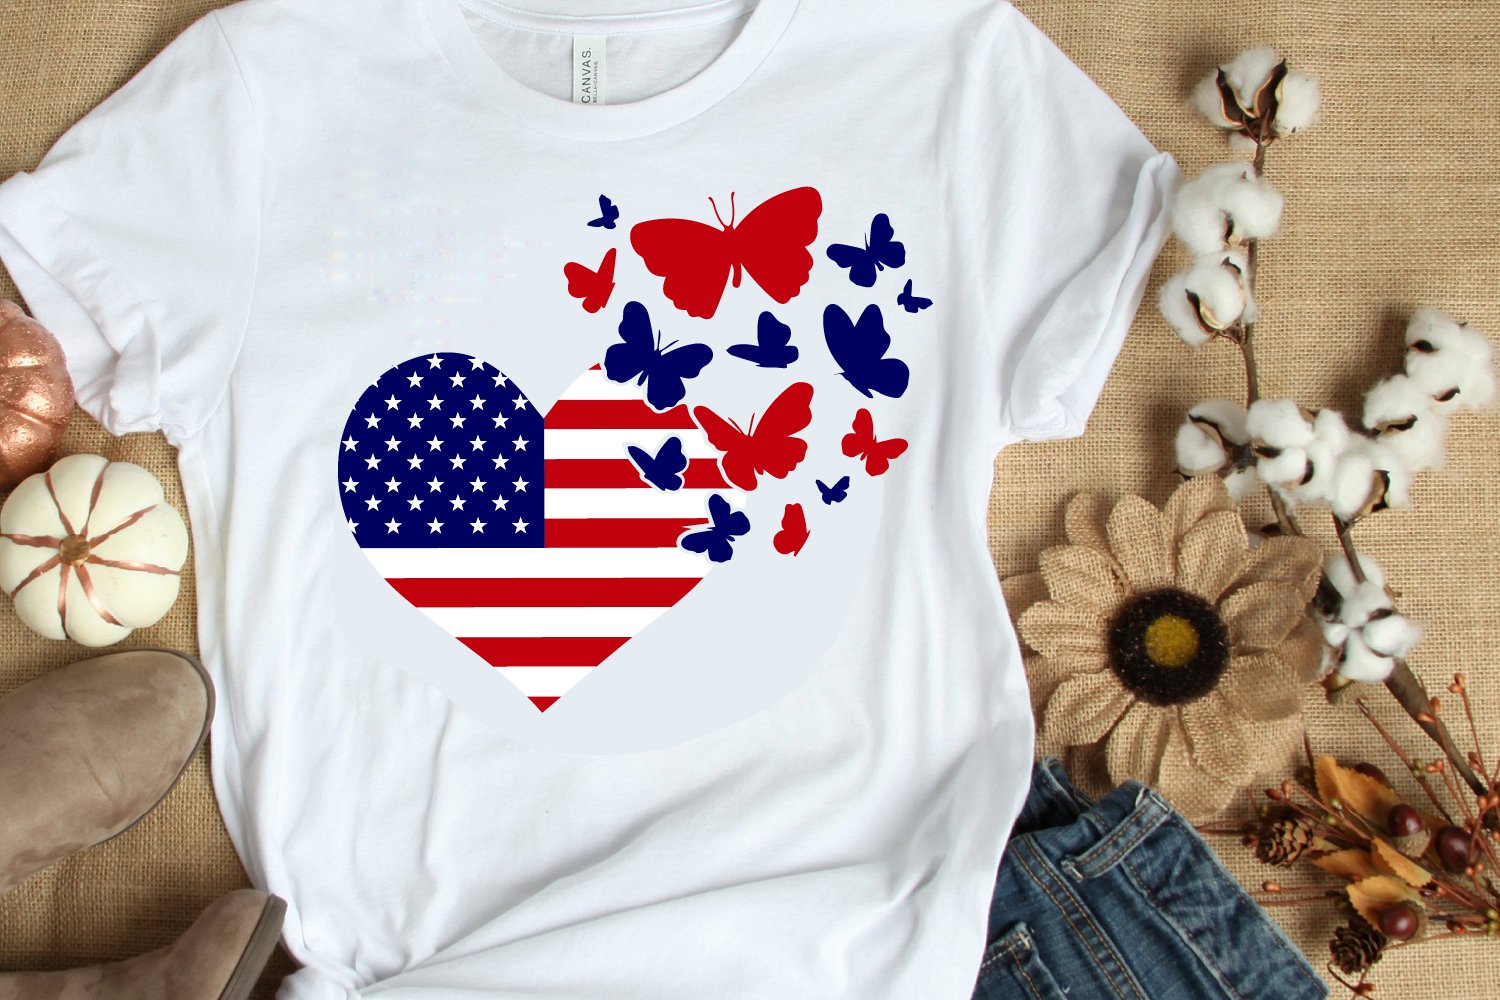 A wonderful print with a heart in the USA flag.